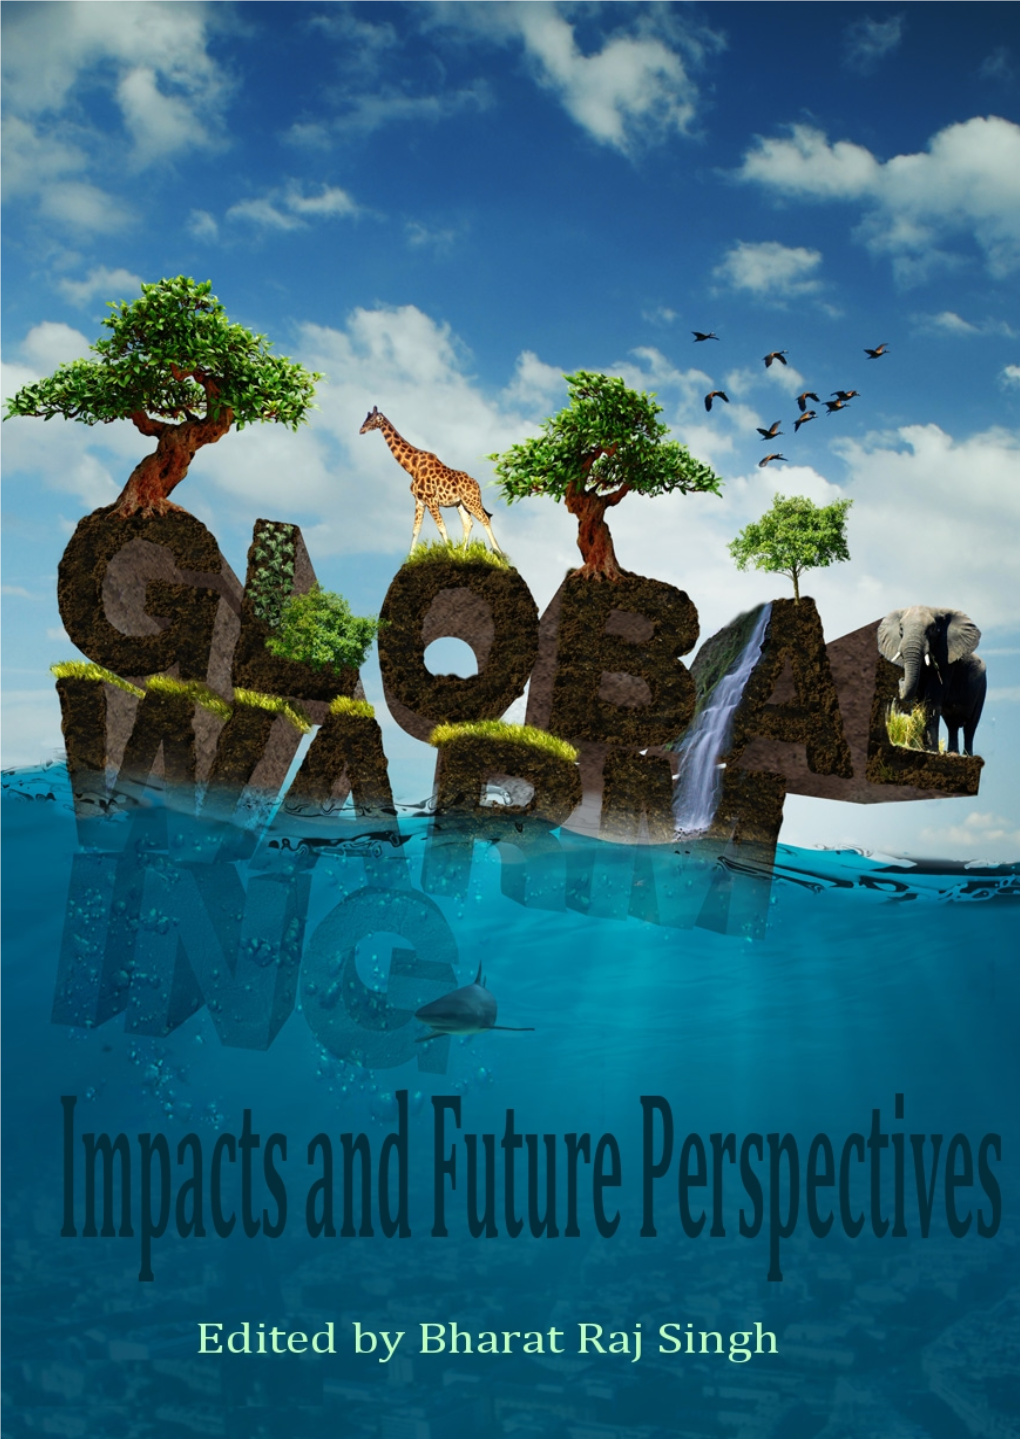 Global Warming – Impacts and Future Perspective